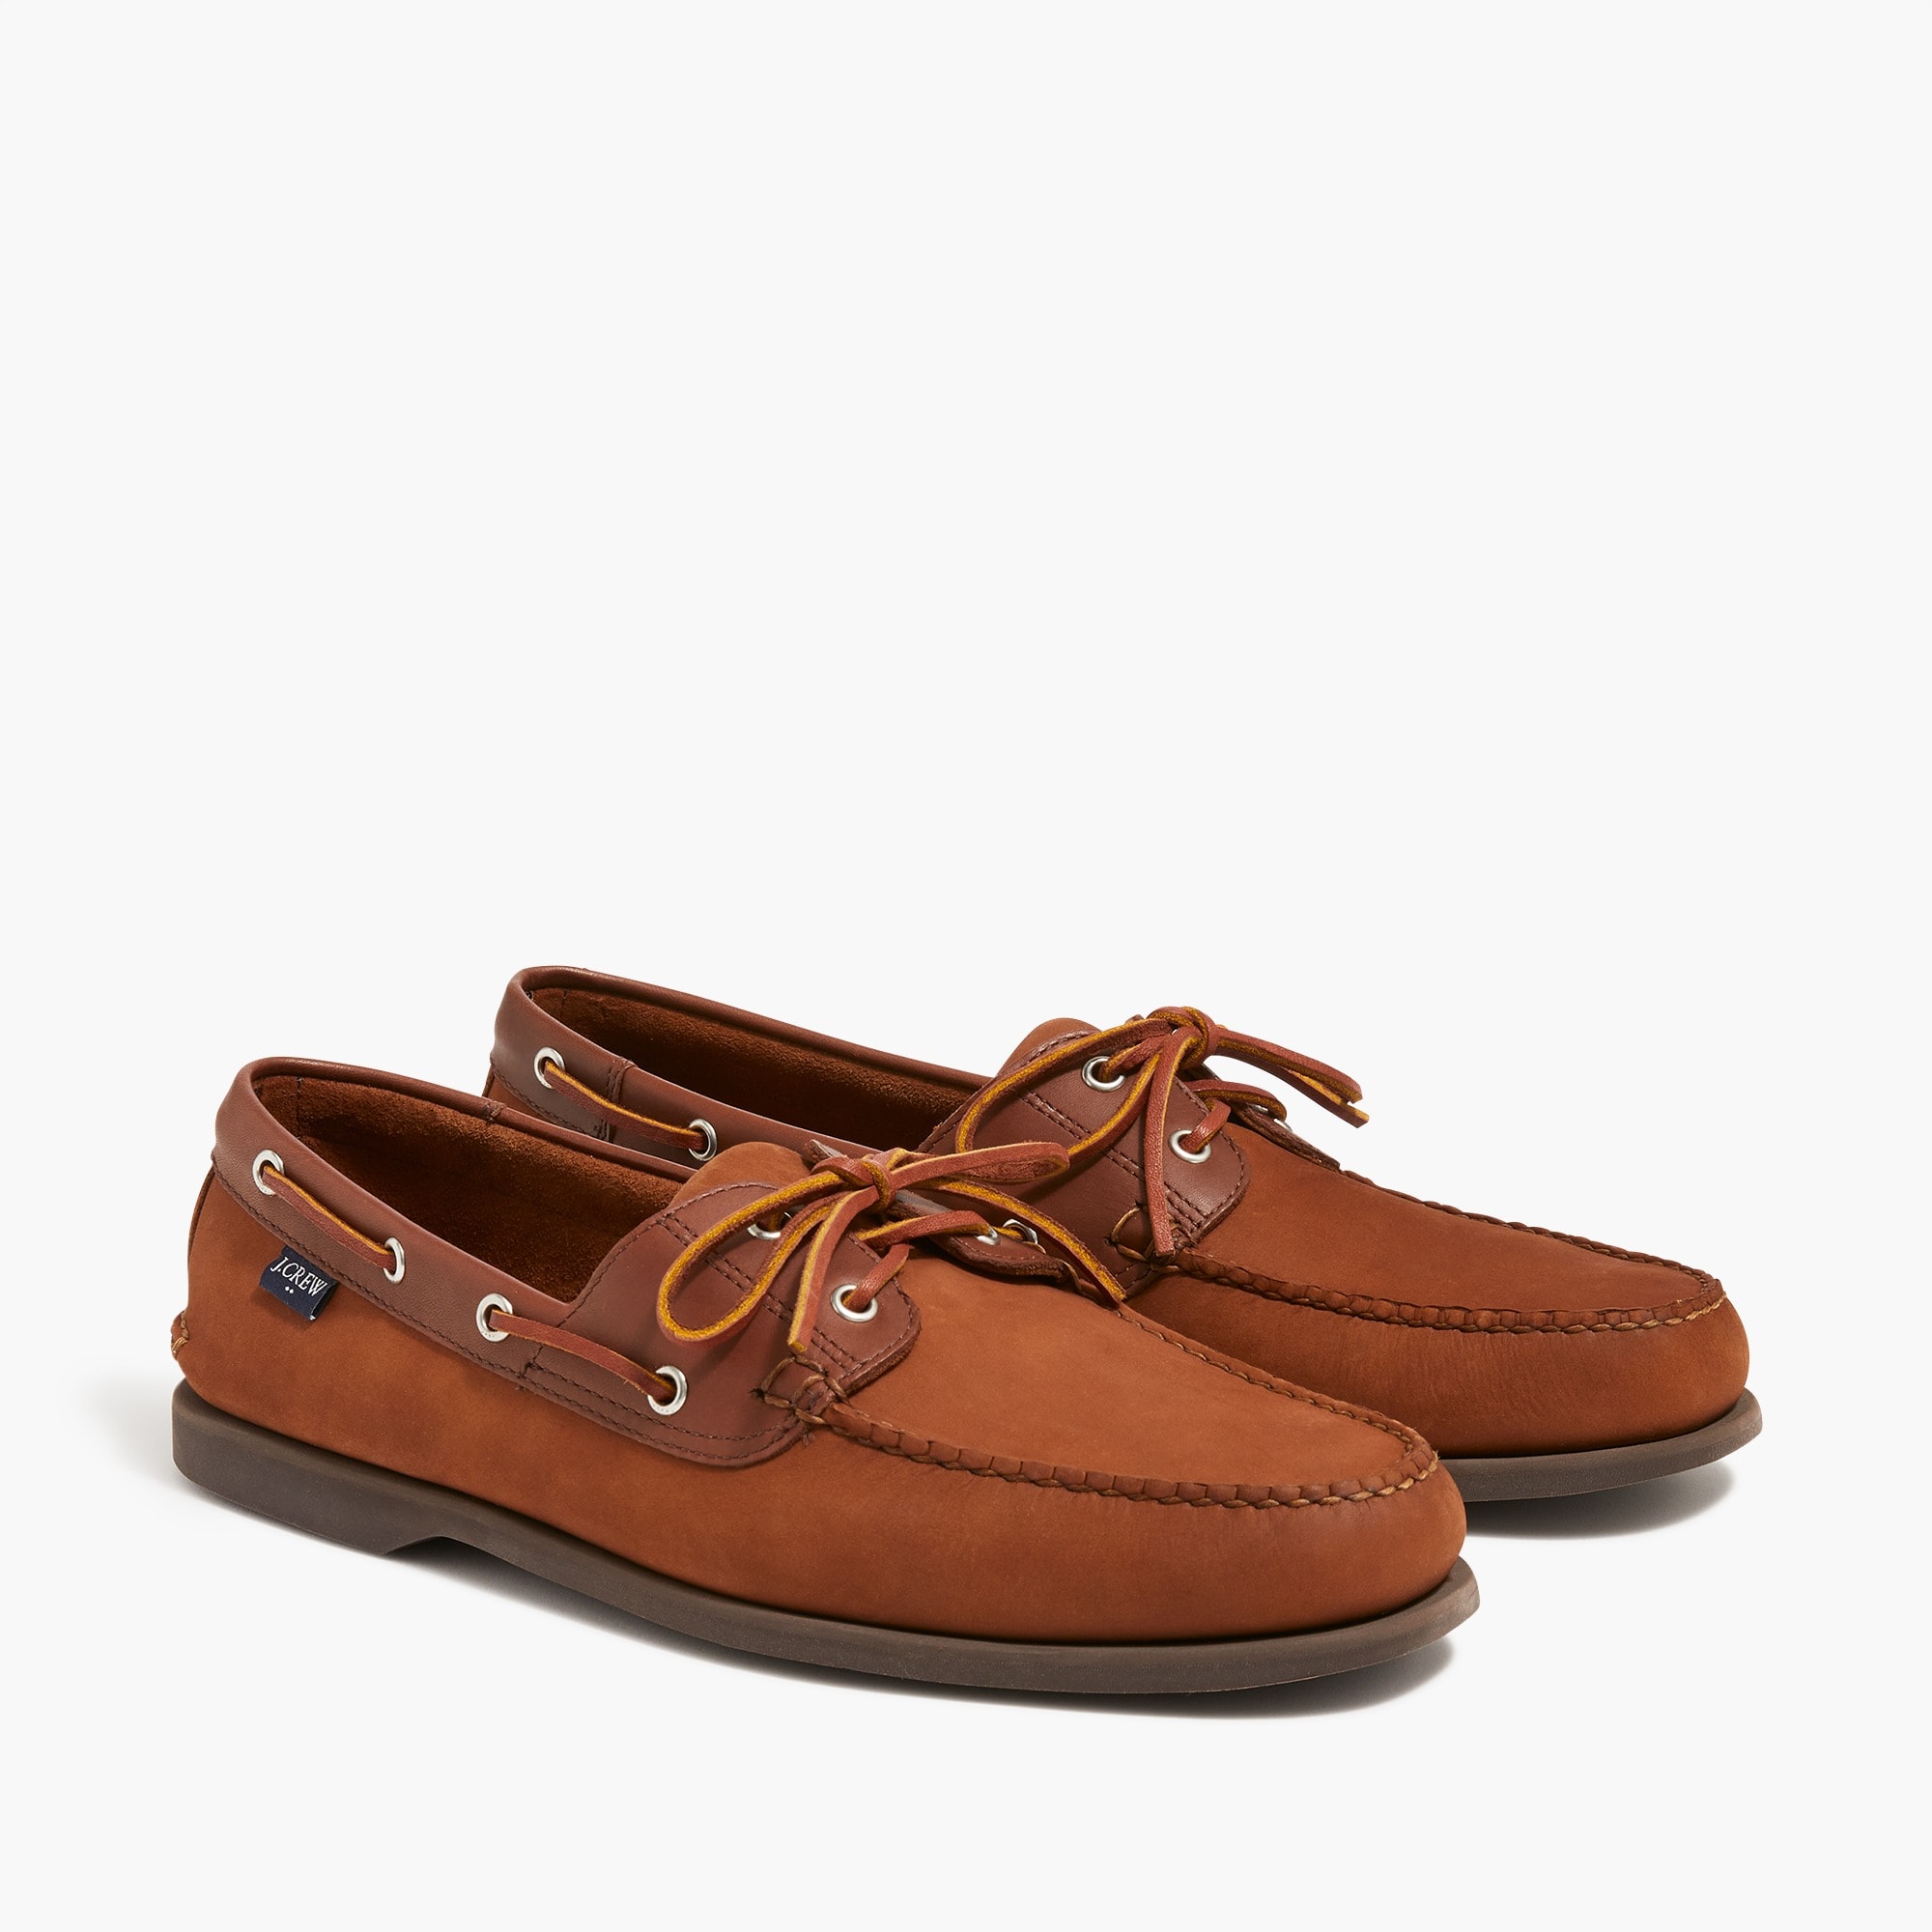 Jcrew Leather boat shoes